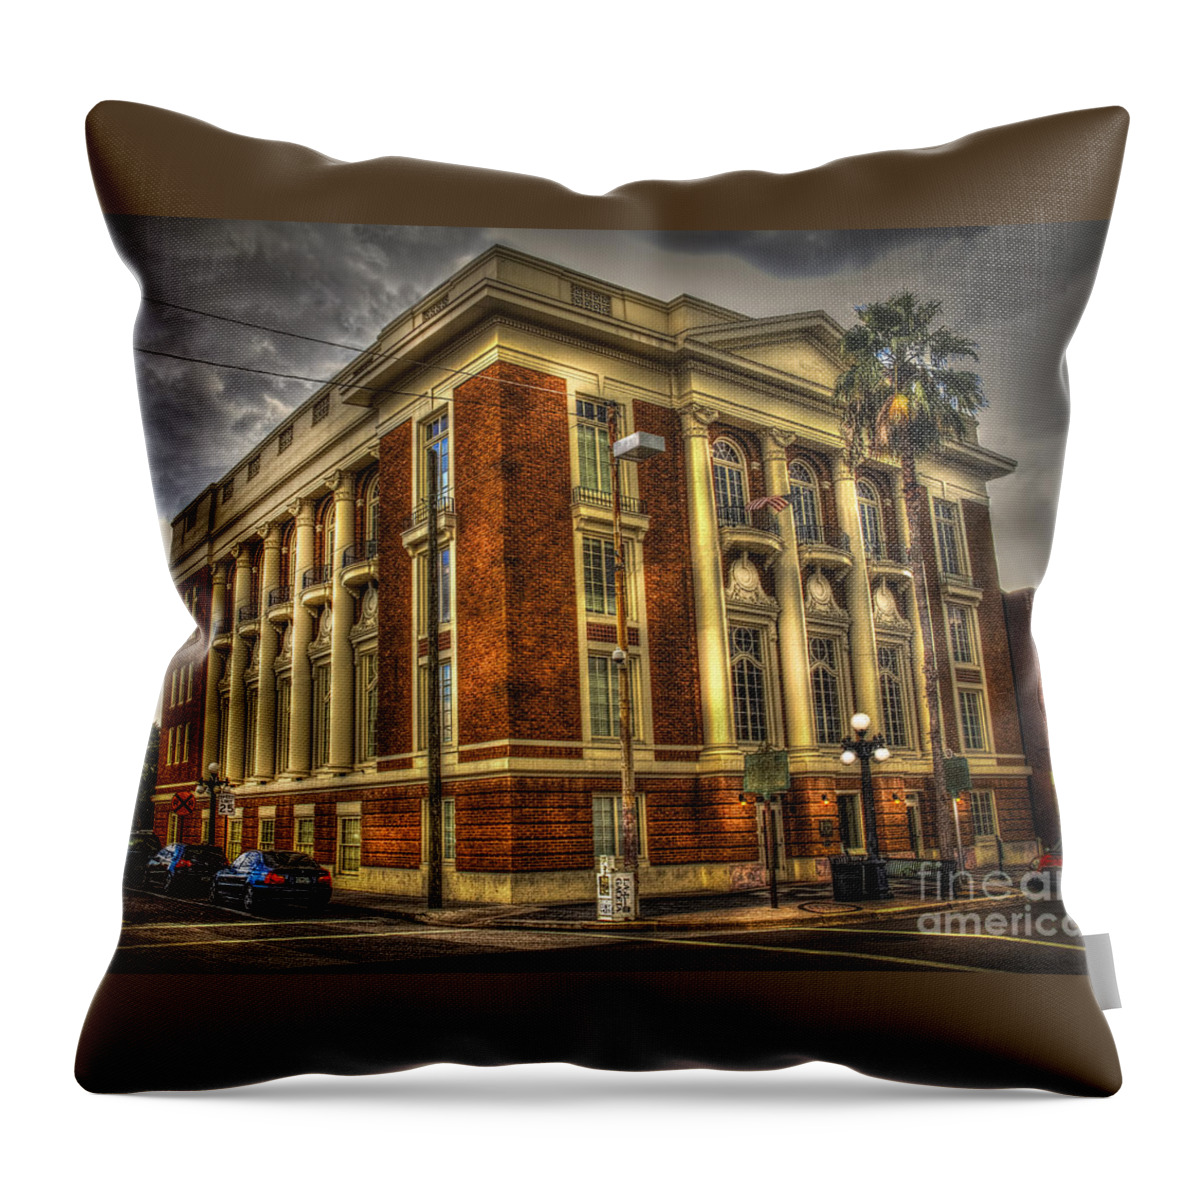 Old Buildings Throw Pillow featuring the photograph The Italian Club by Marvin Spates